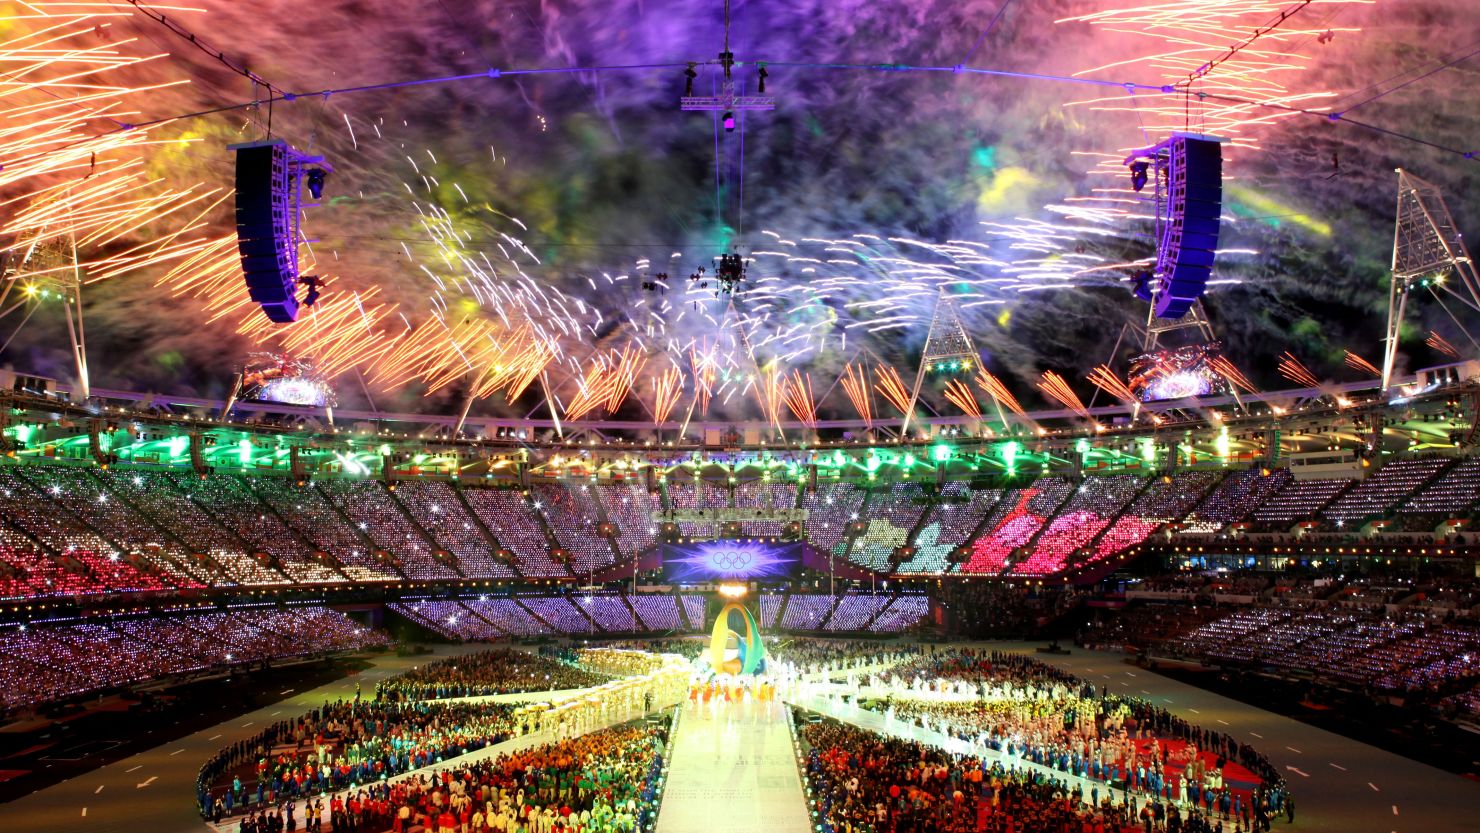 The Olympic Stadium in London was packed to the rafters during the 2012 Olympic and Paralympic Games.